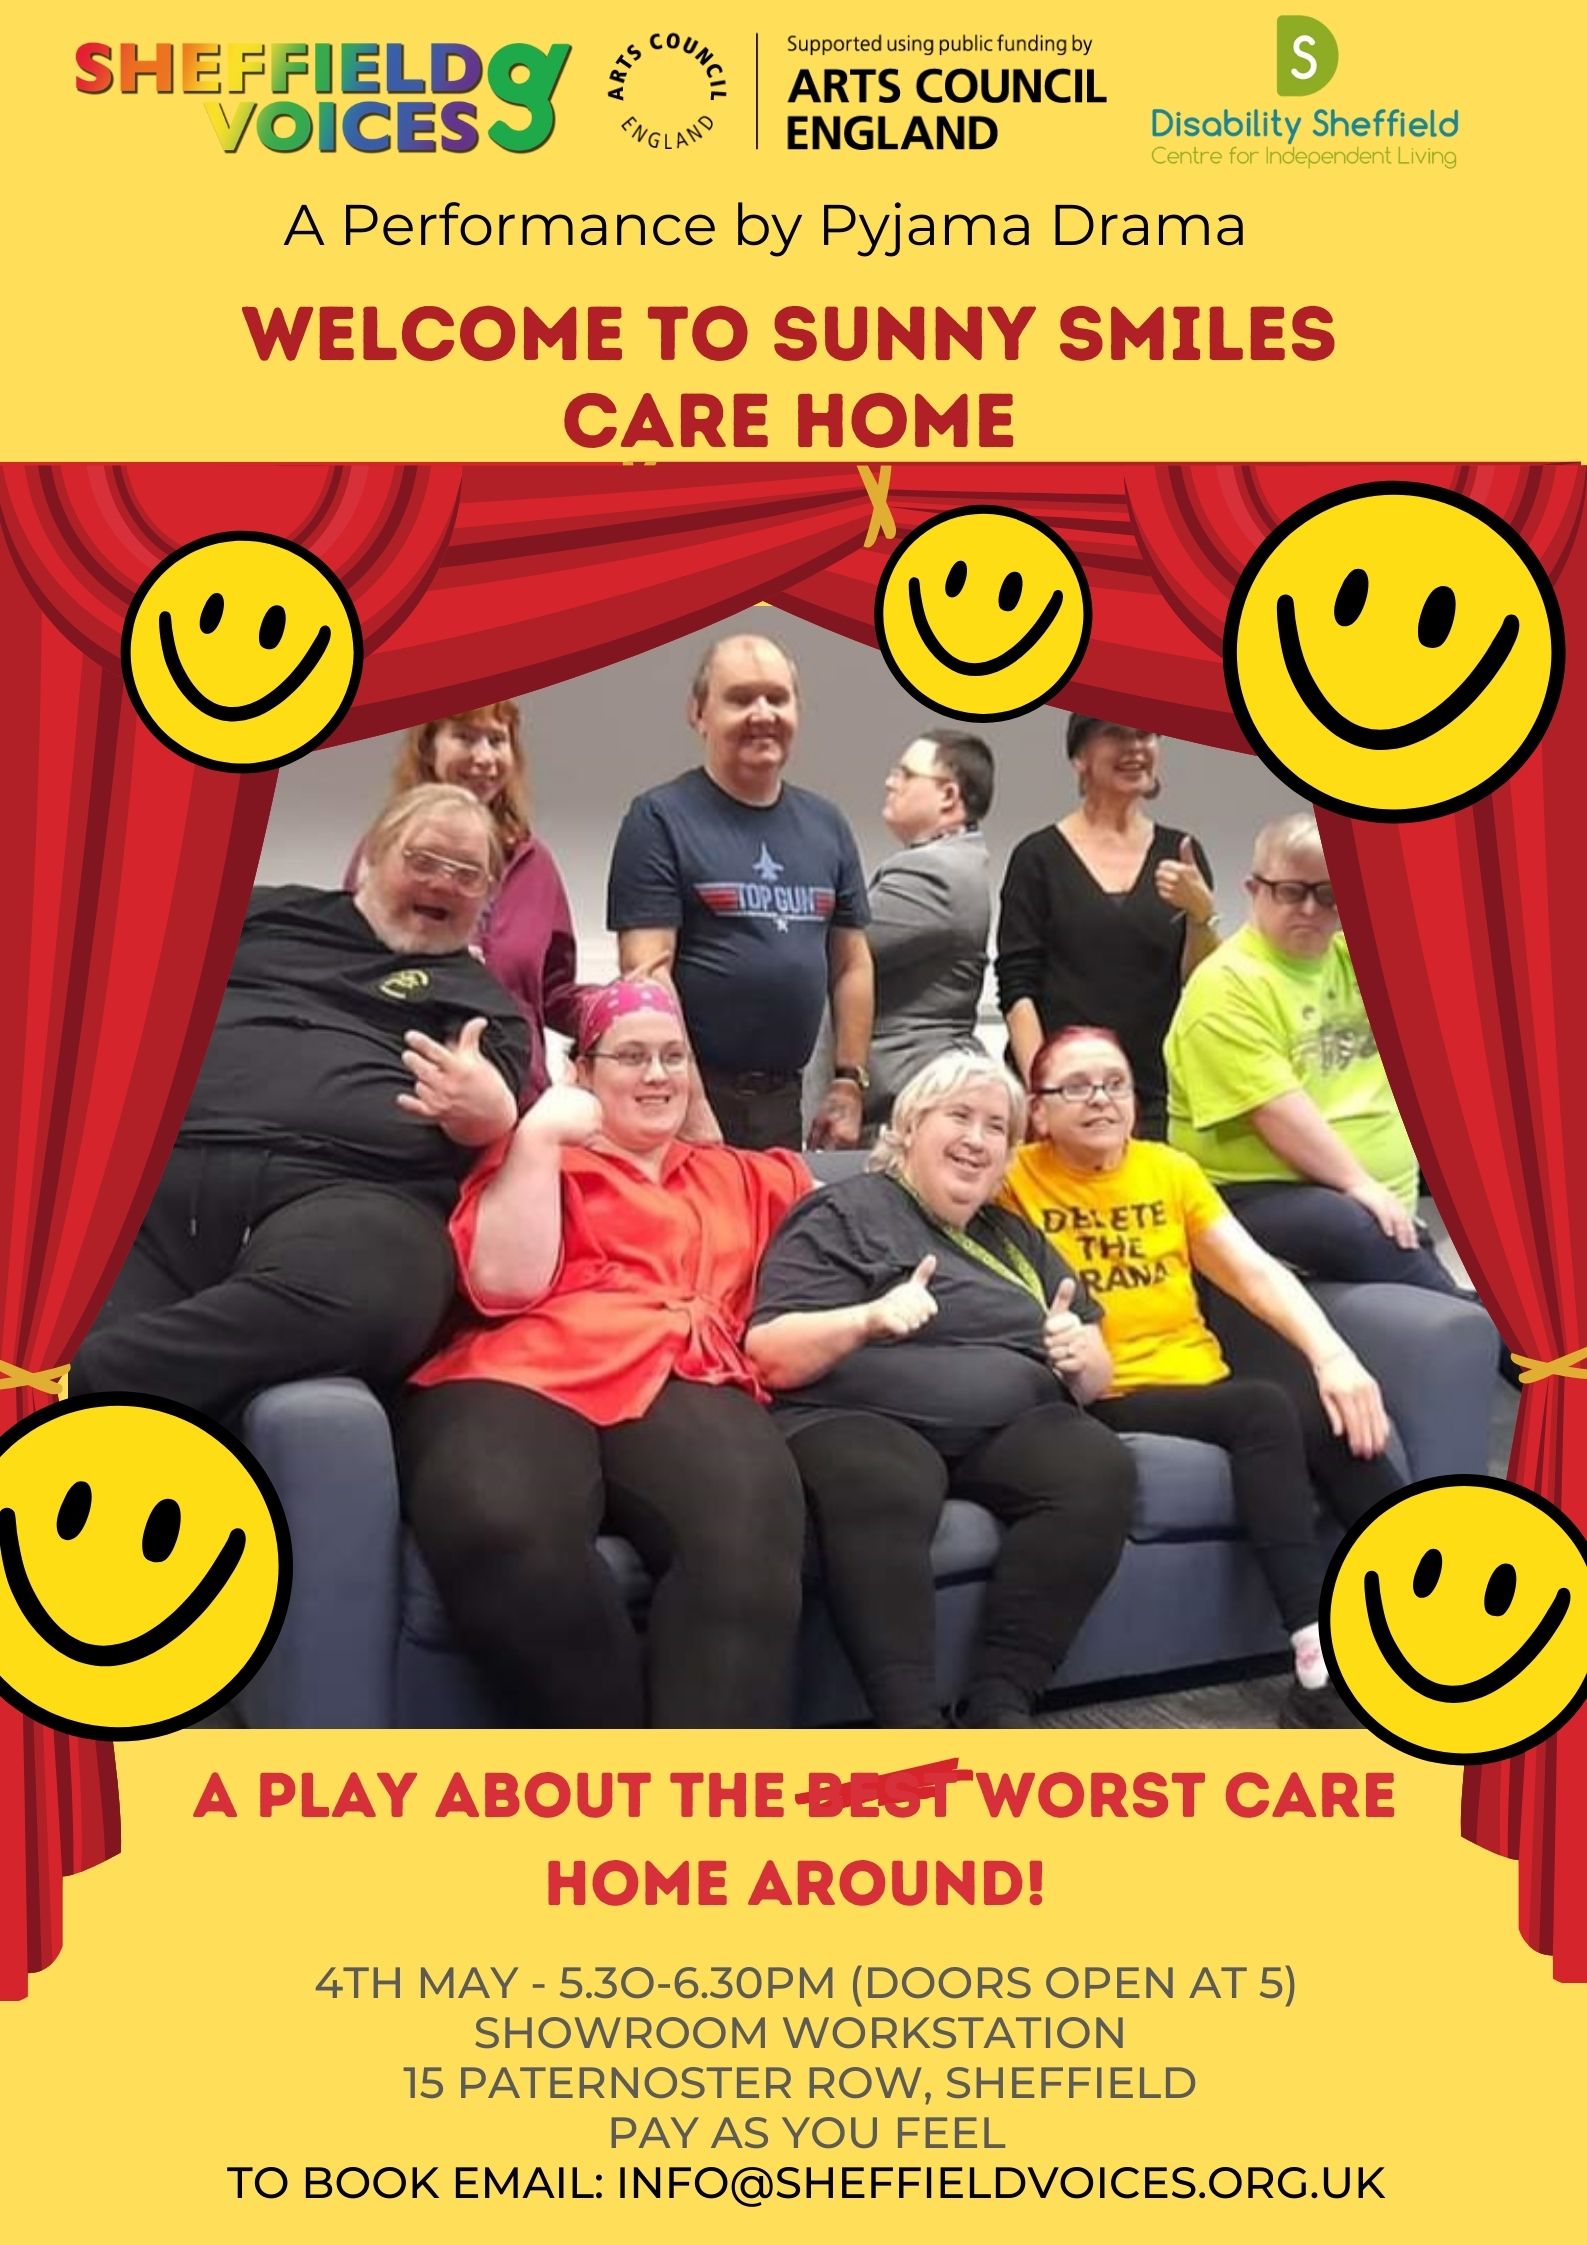 Sunny smiles care home poster